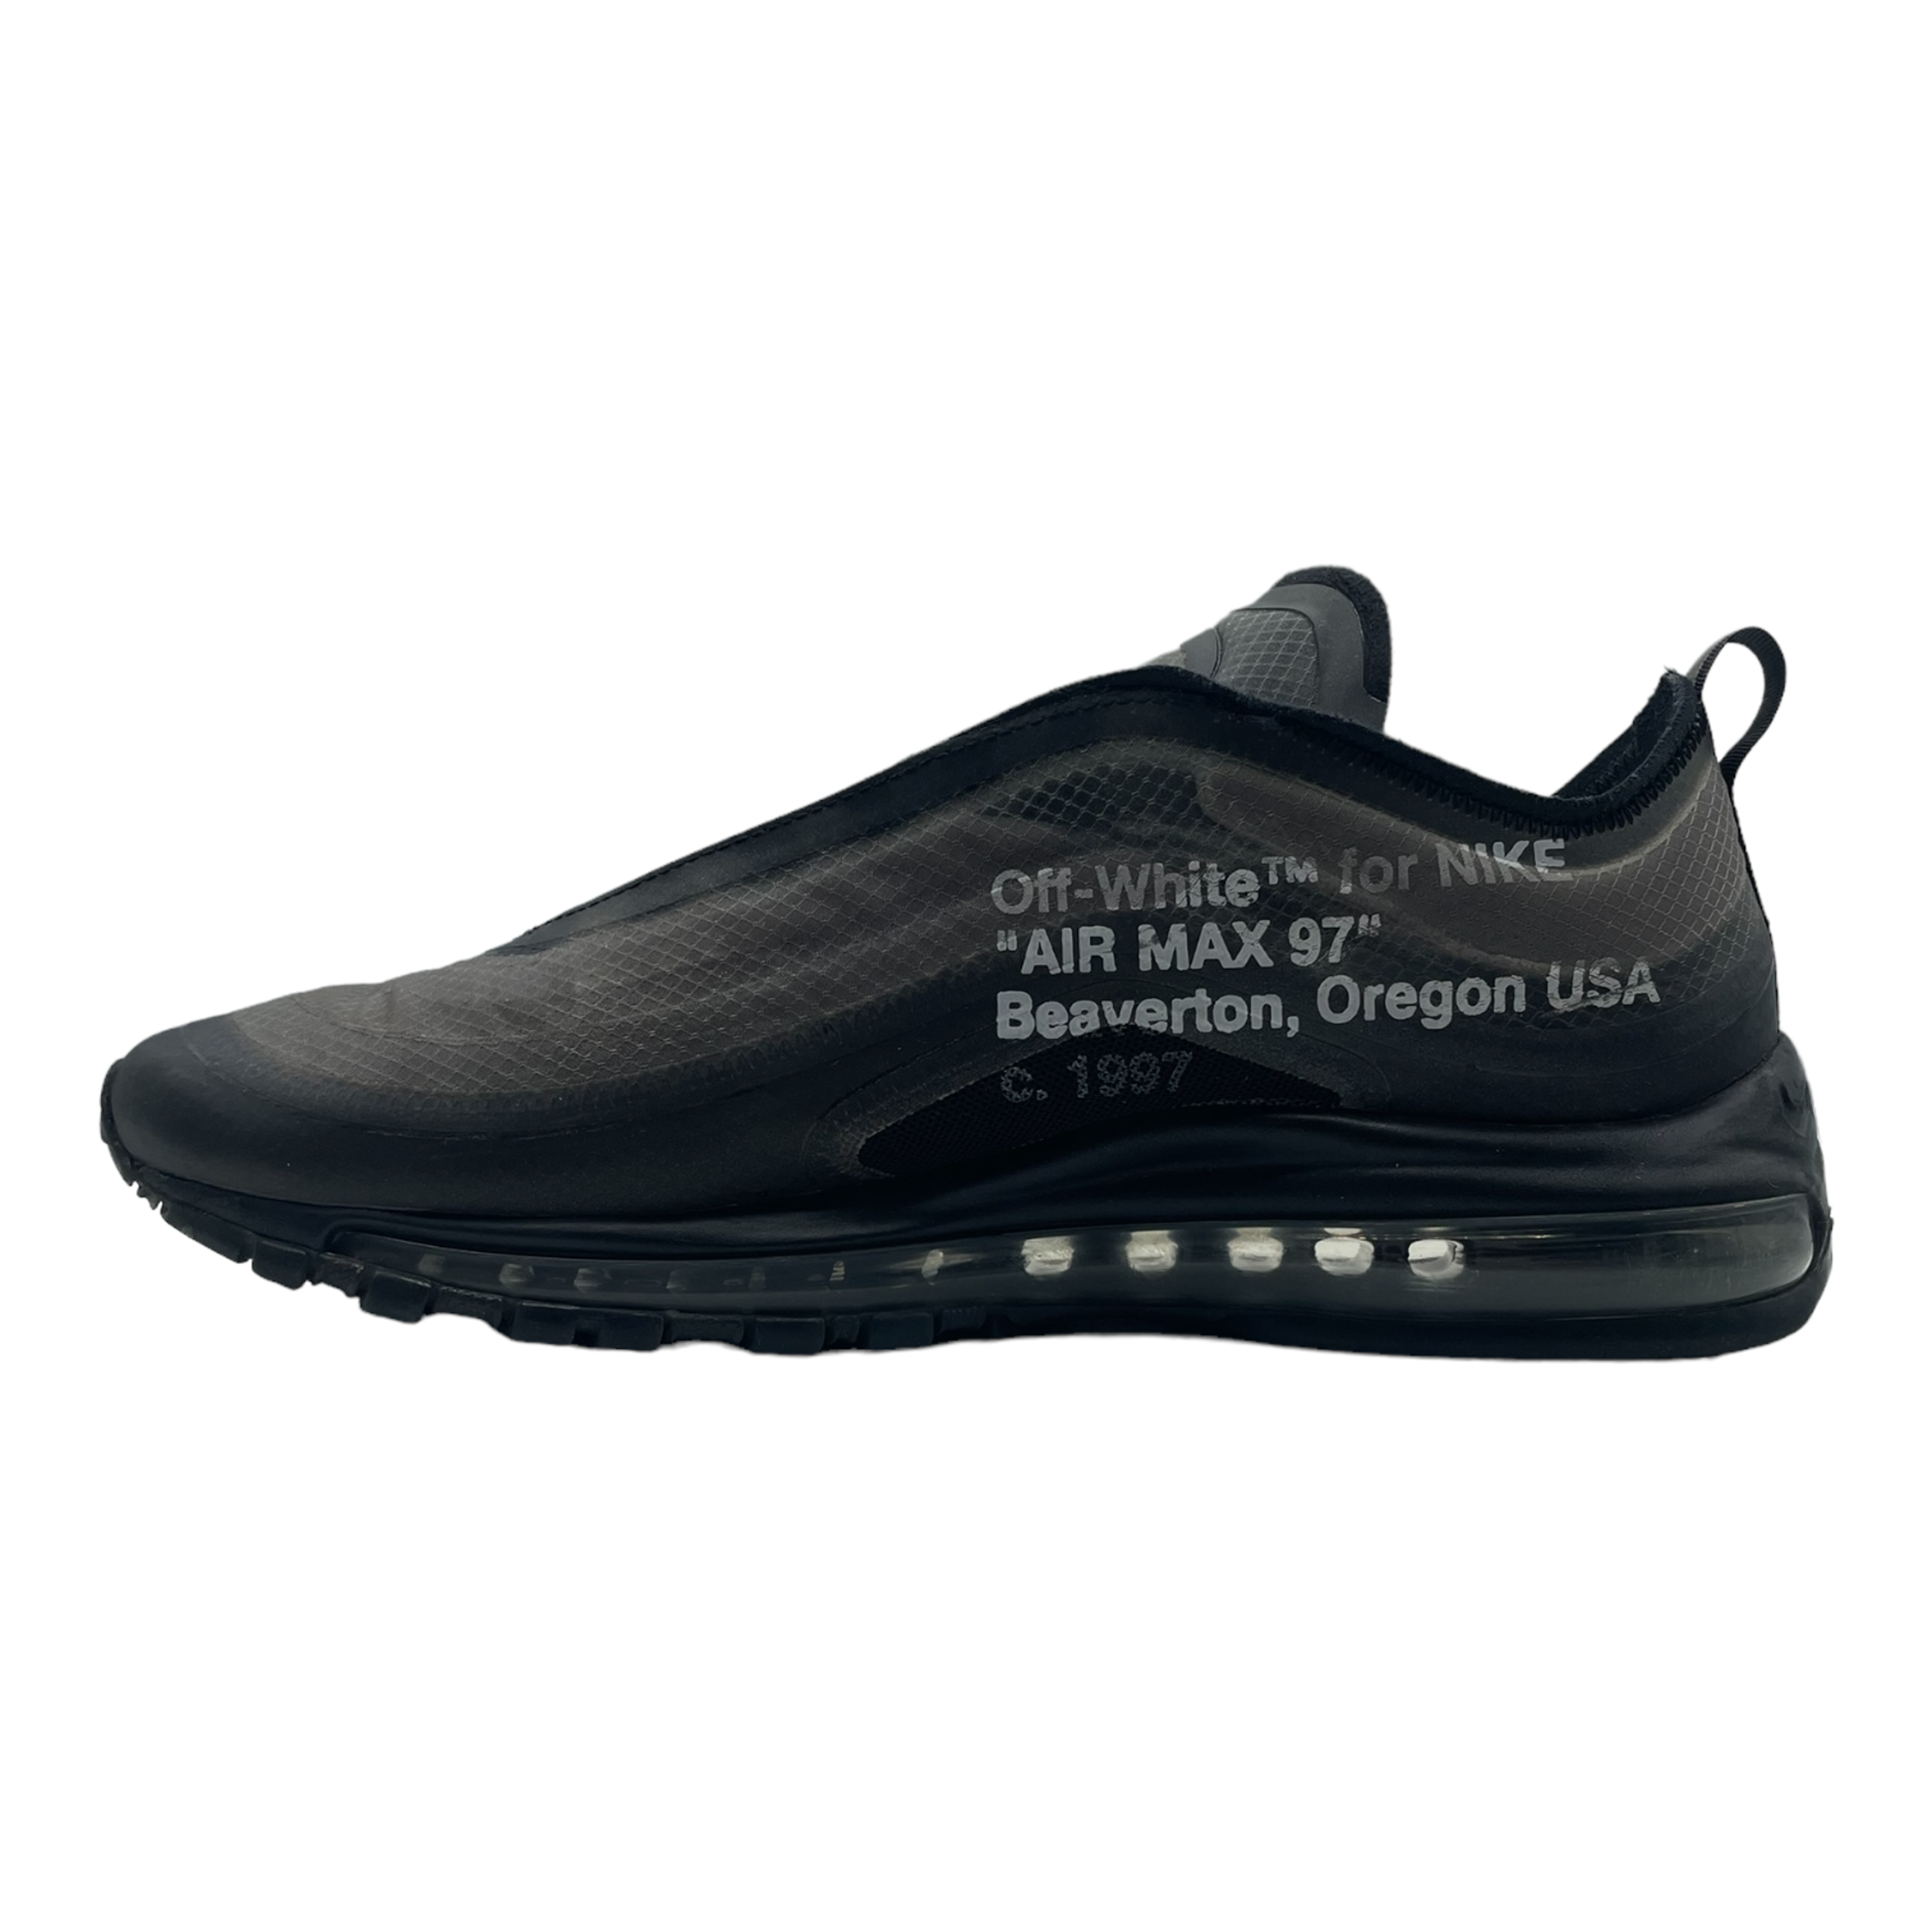 Alternate View 2 of Nike Air Max 97 Off-White Black Pre-Owned